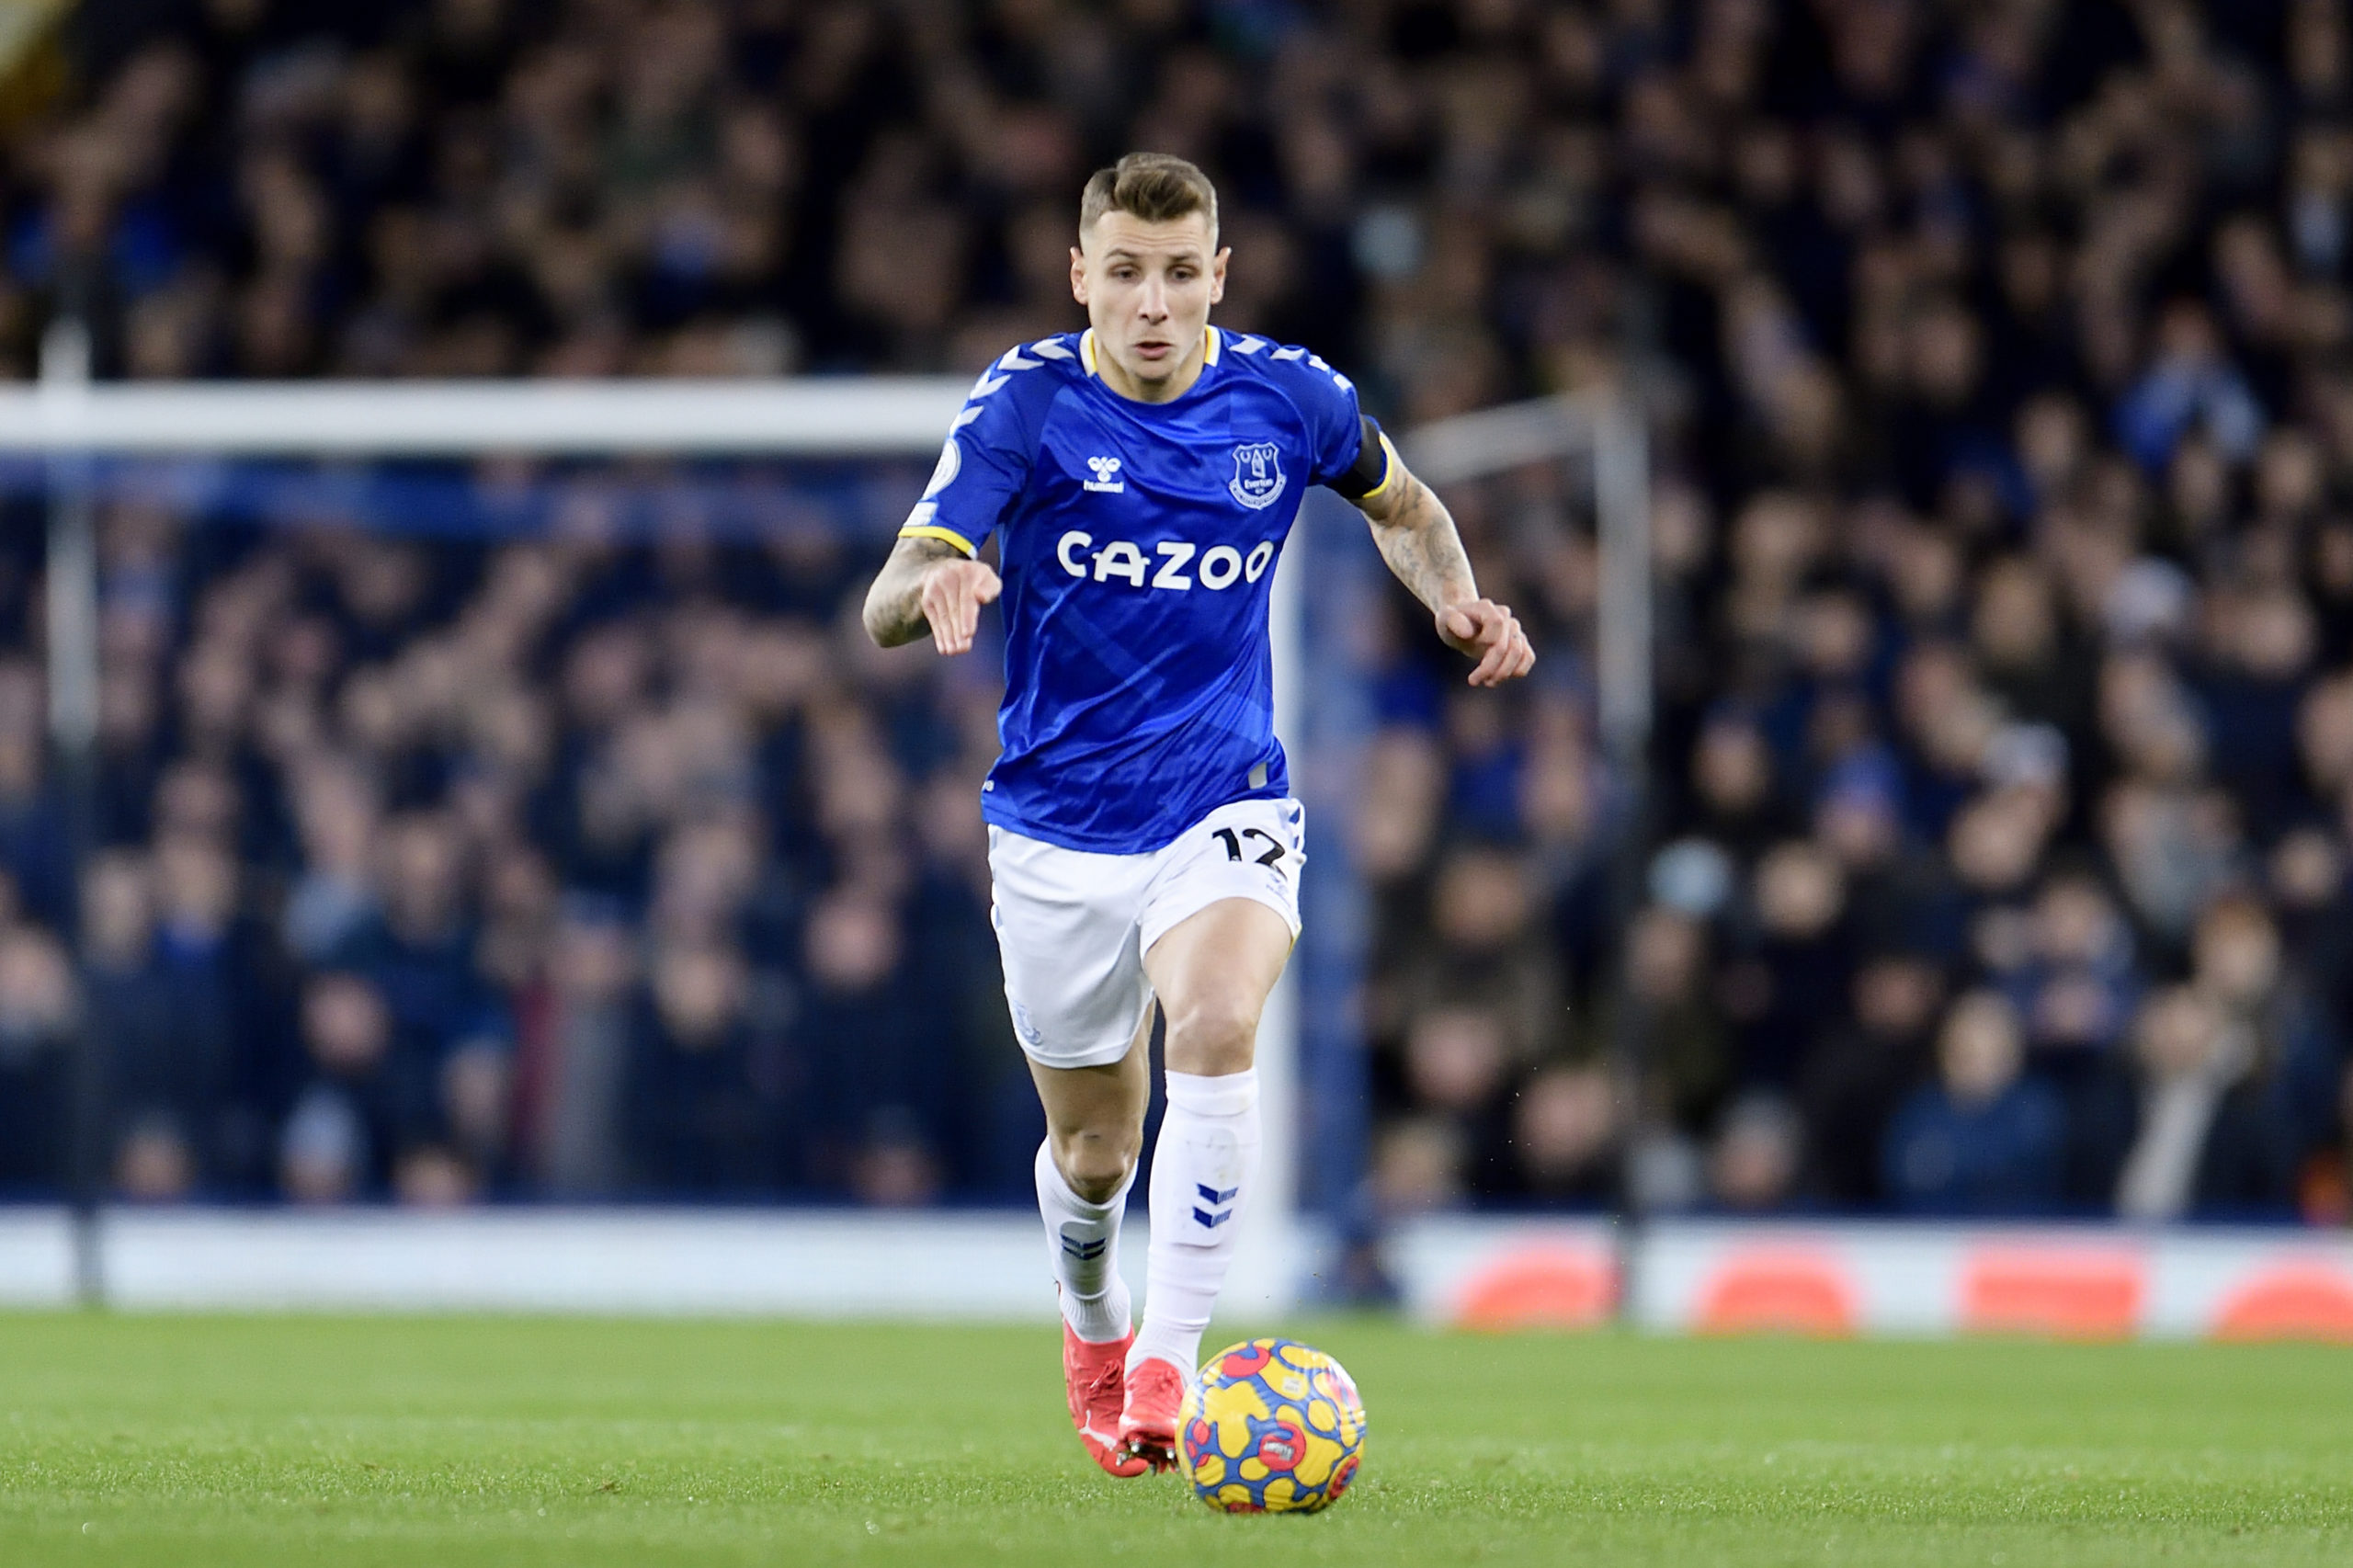 West Ham are allegedly eyeing up a move to sign Everton ace Lucas Digne